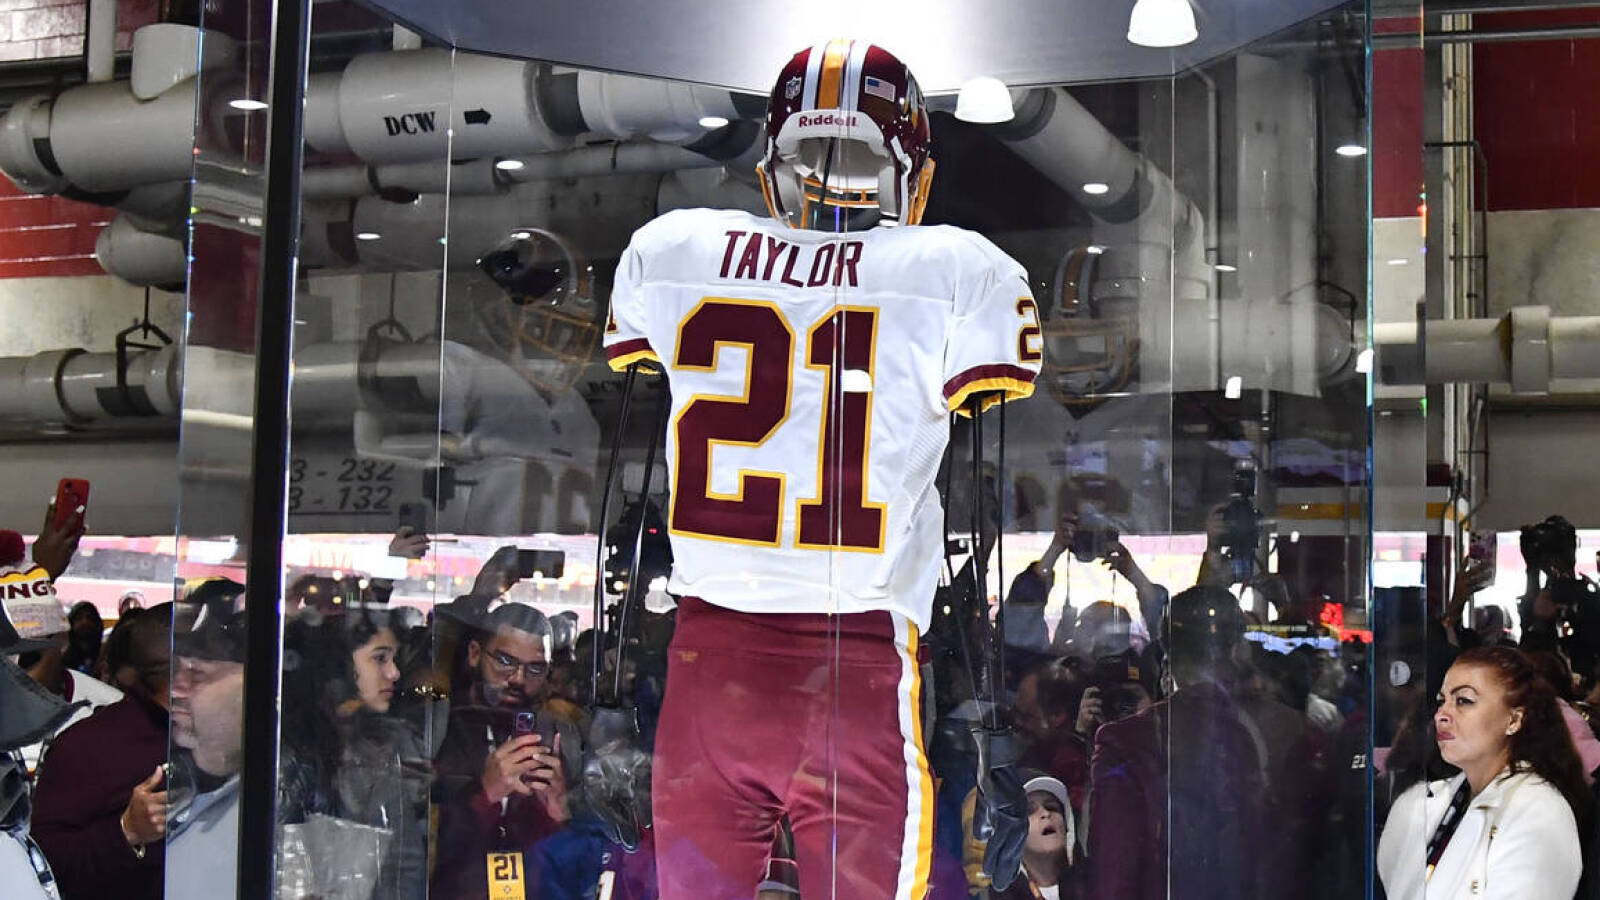 Sean Taylor's half-brother saw no issue with Commanders' tribute